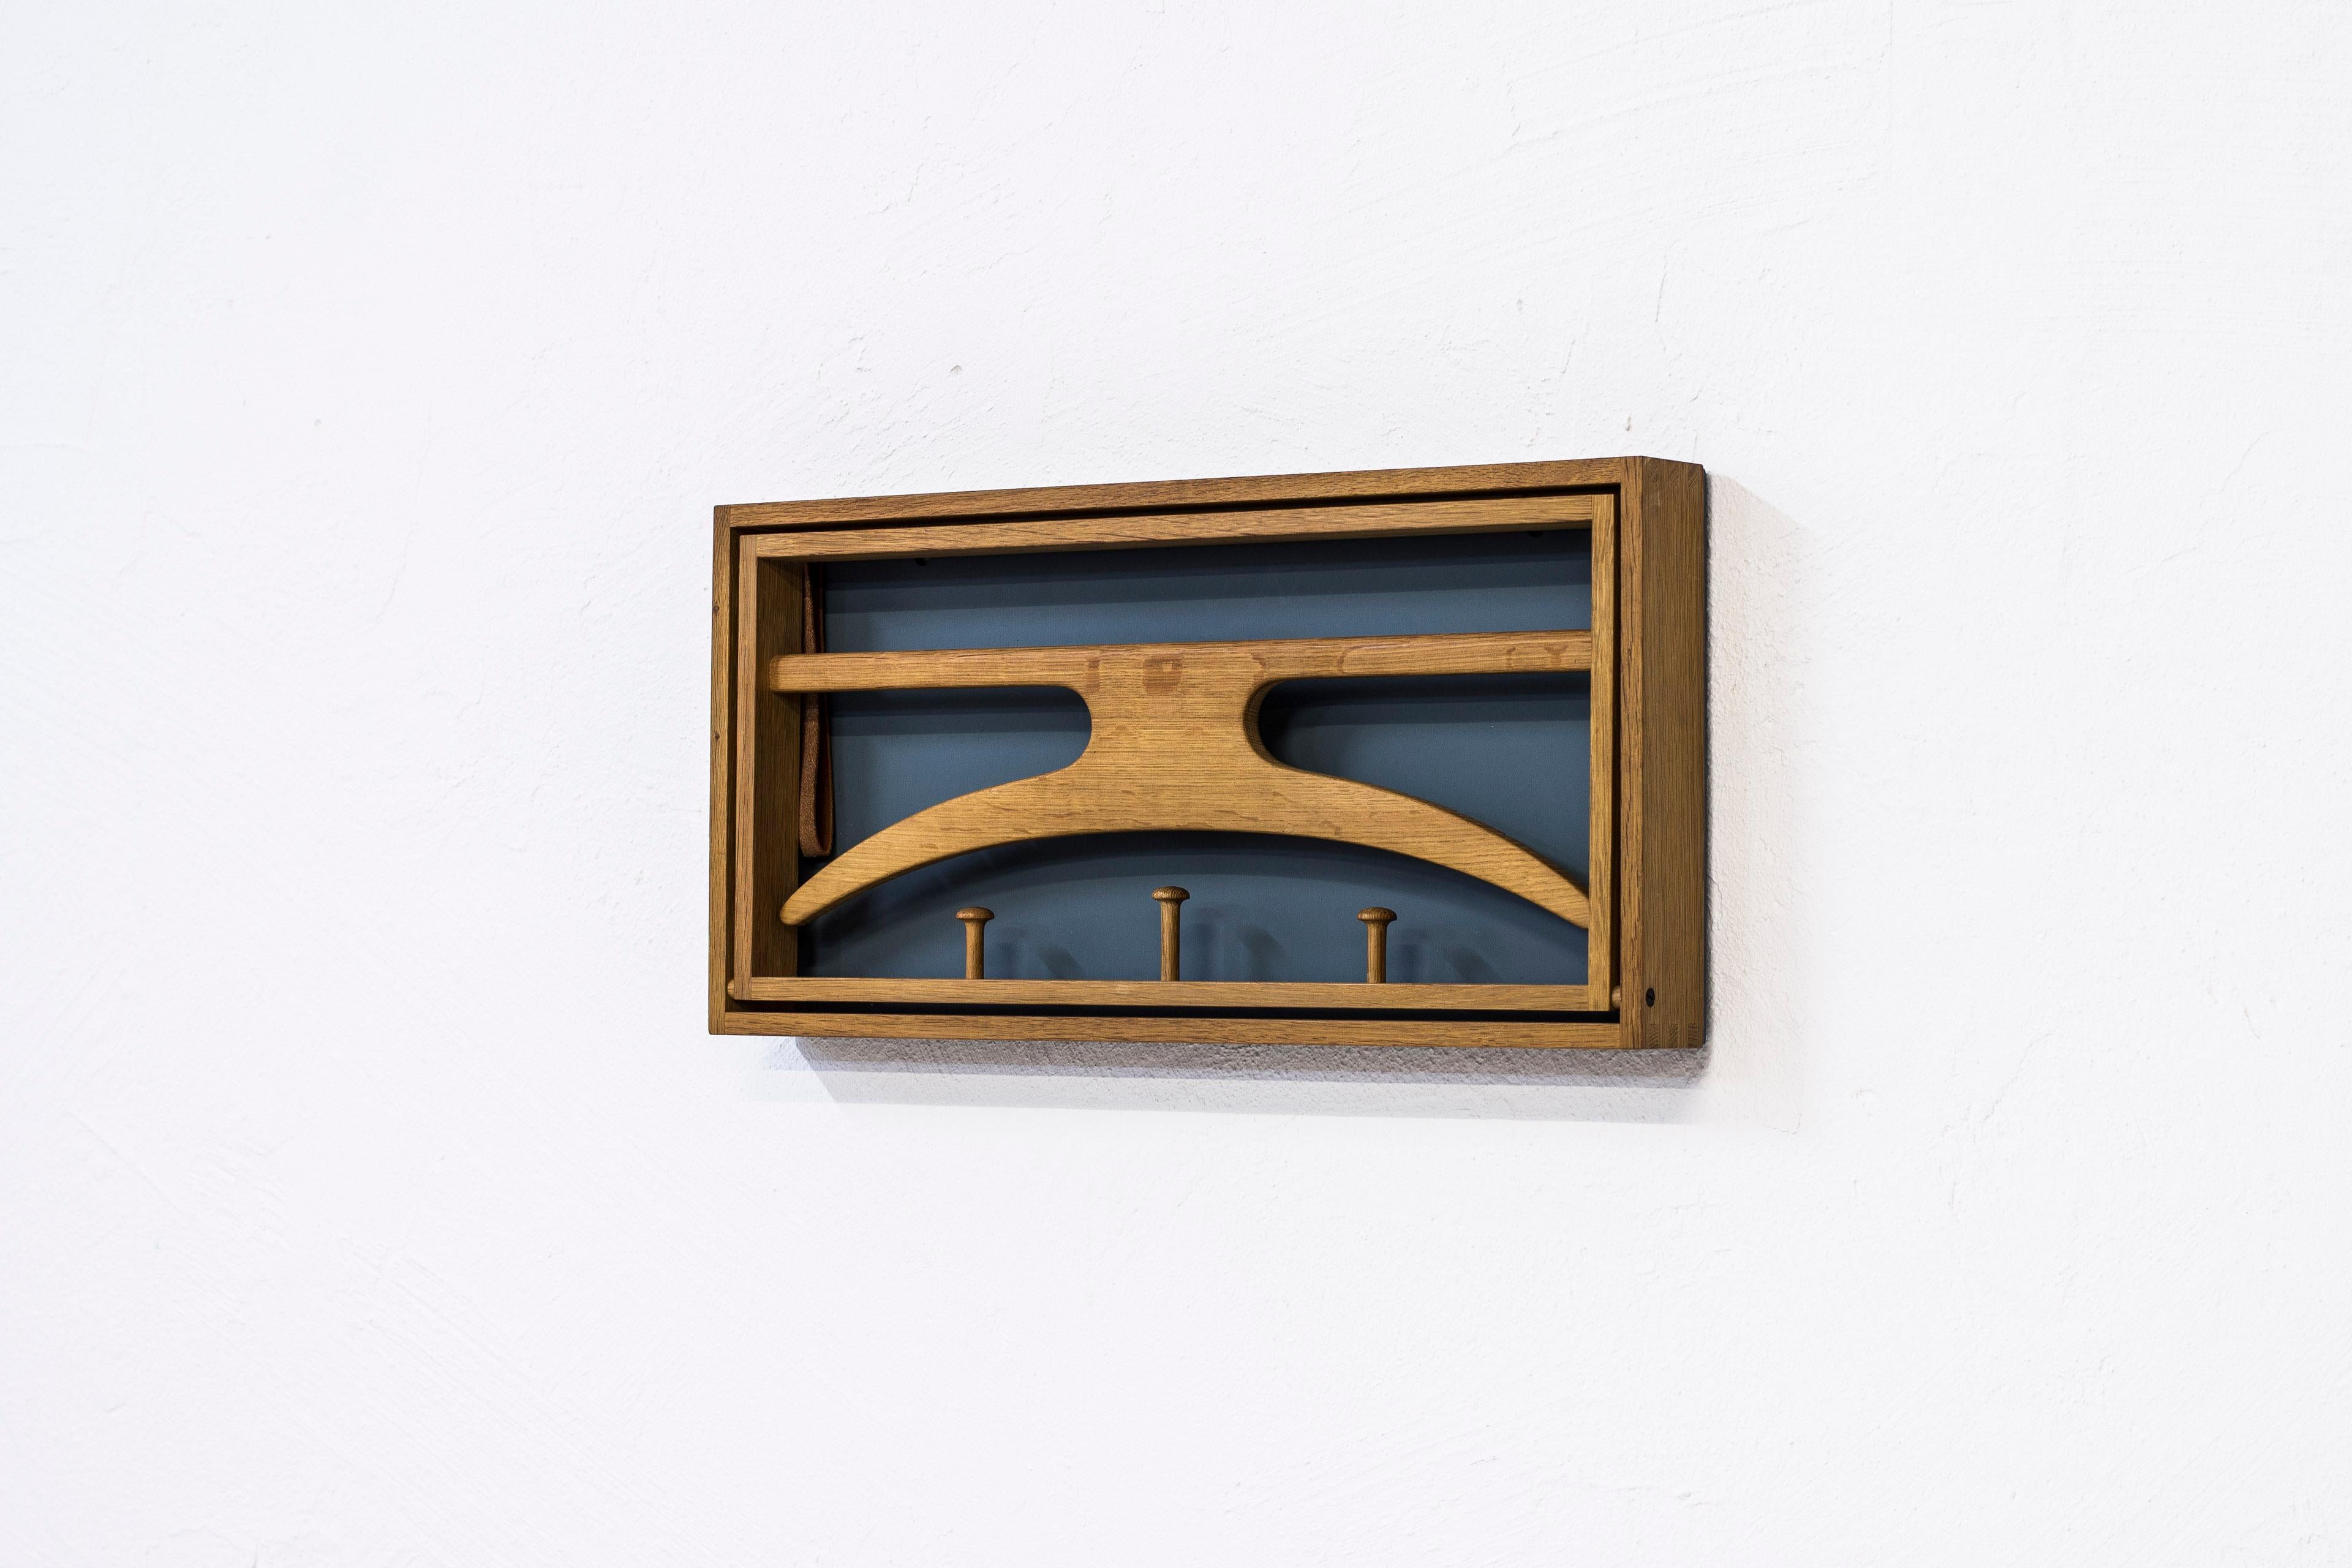 Wall-mounted valet designed by Adam Hoff & Poul Østergaard. Produced in Denmark during the late 1950s by Virum Møbelsnedkeri. Solid oak frame with visible joinery, original leather straps and lacquered masonite. Excellent condition with very light